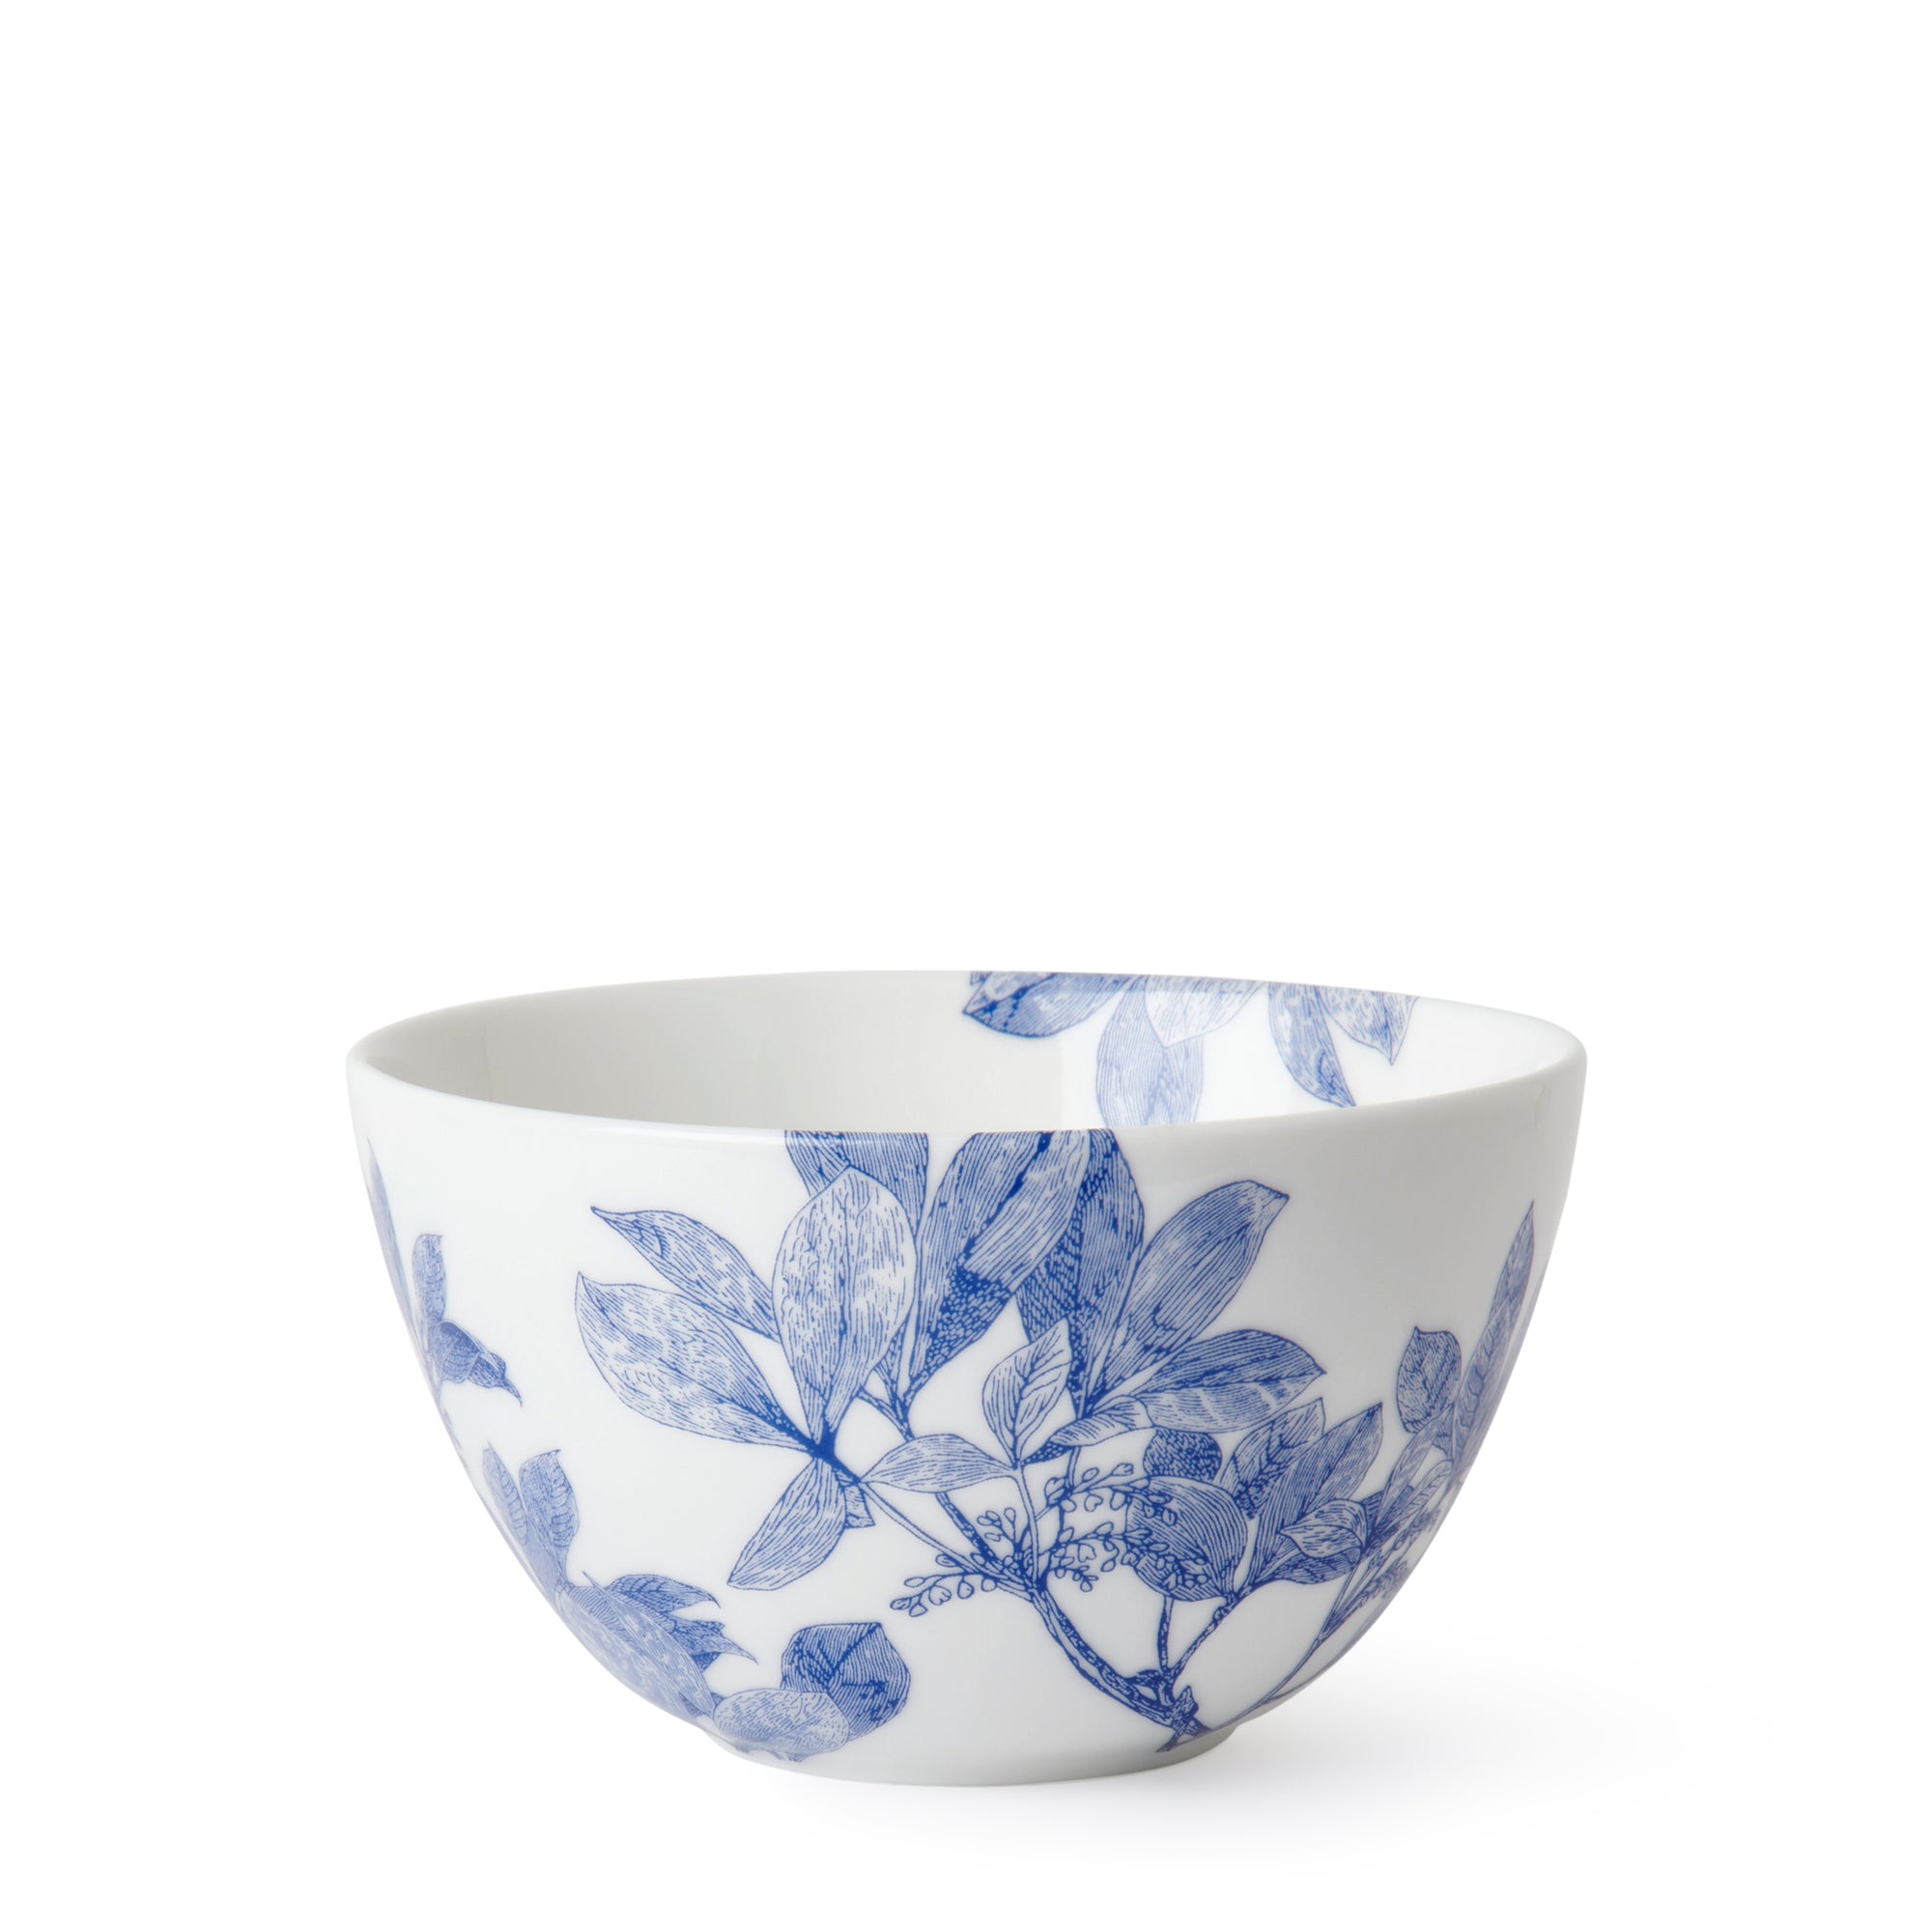 A white ceramic Arbor Cereal Bowl by Caskata with blue floral patterns features detailed leaves and branches, crafted from premium porcelain.